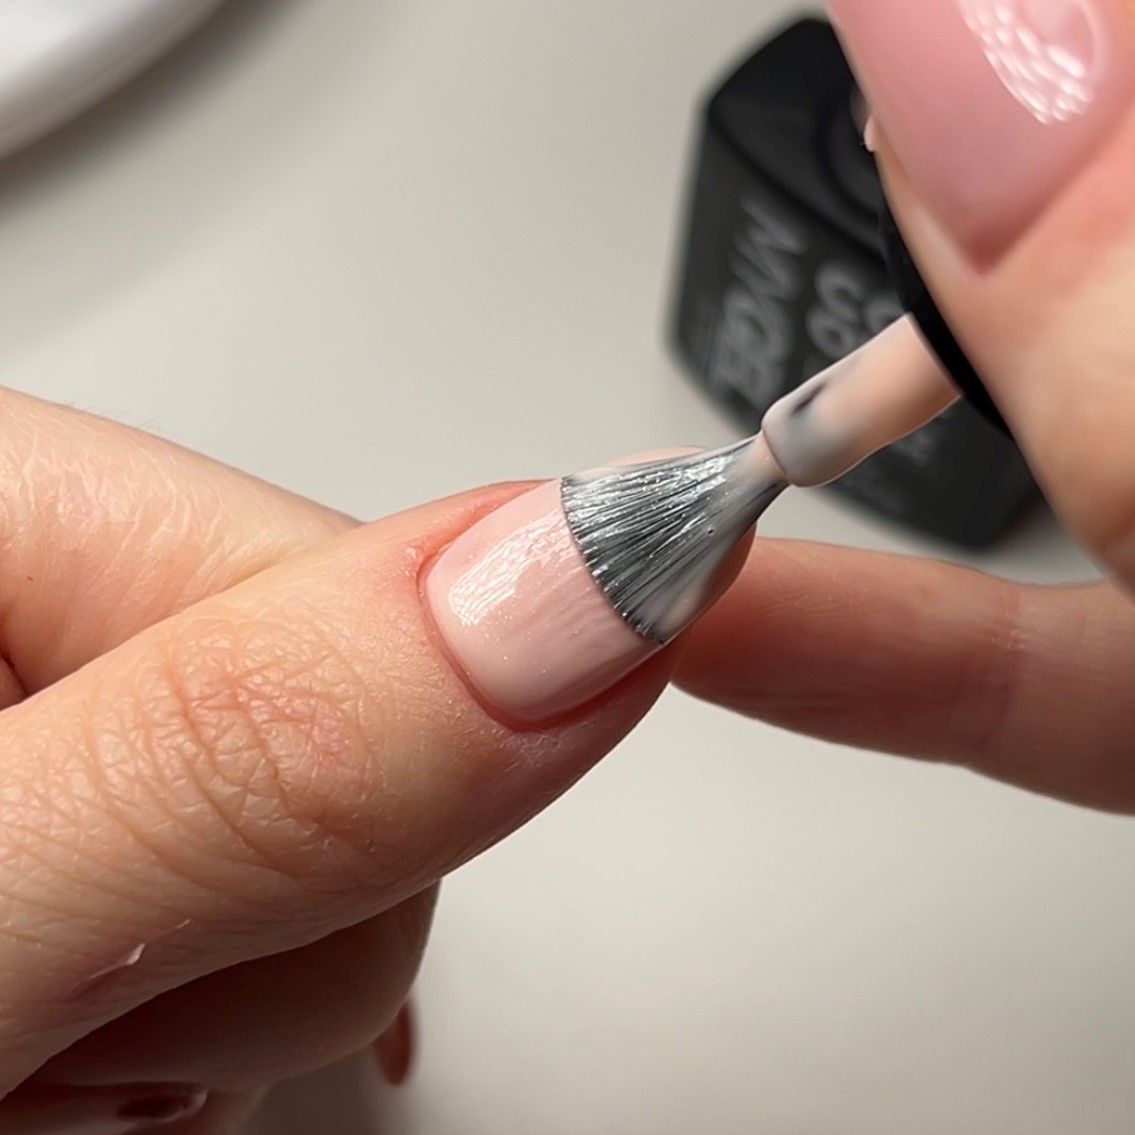 17 Manicure Tips That'll Keep Your Nail Polish From Chipping | Glamour